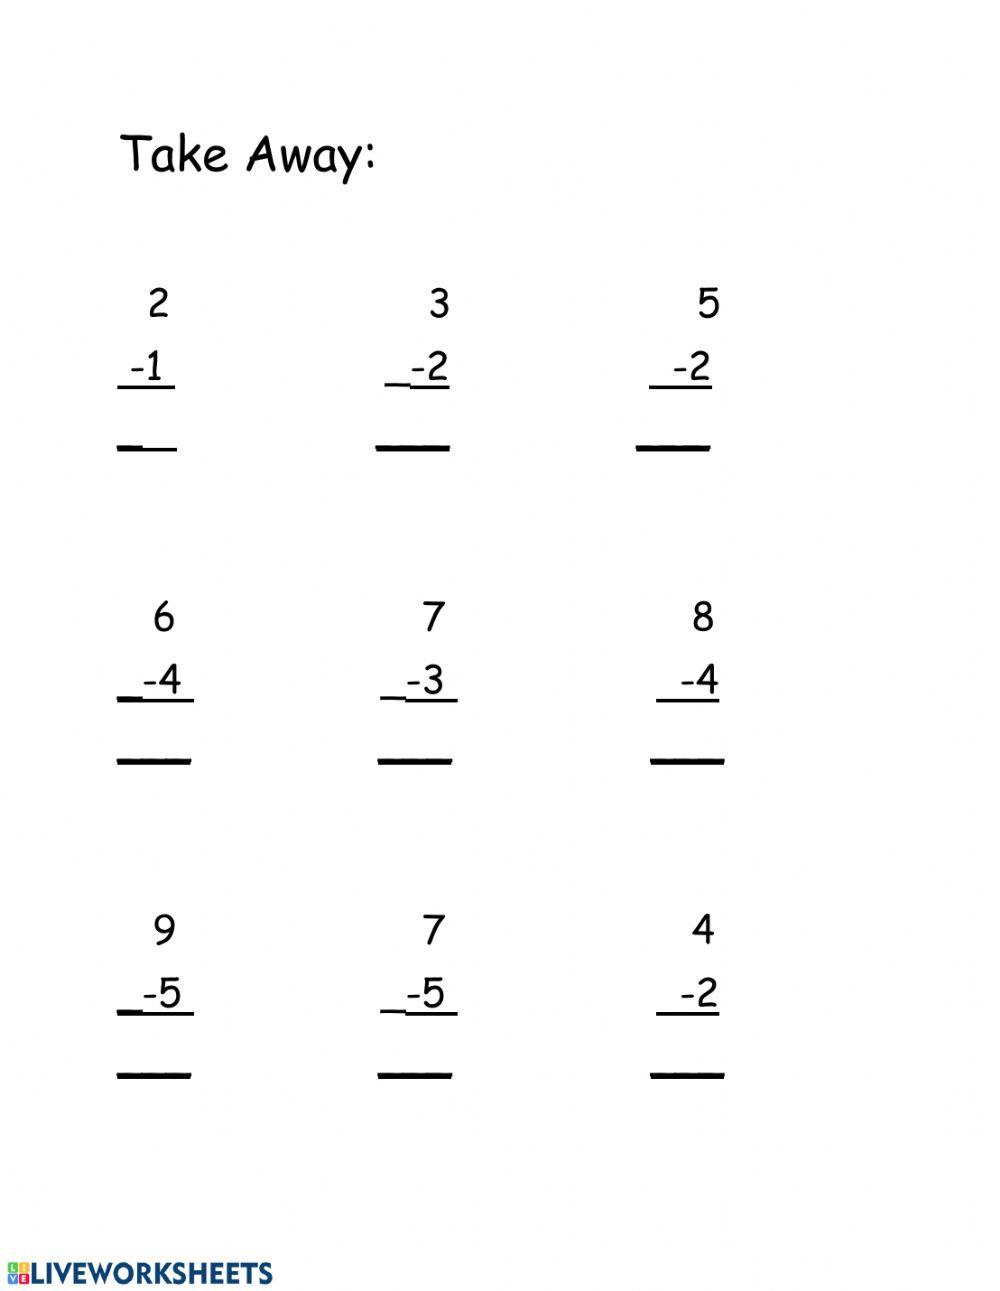 Vertical Take Away - Subtraction 1-10